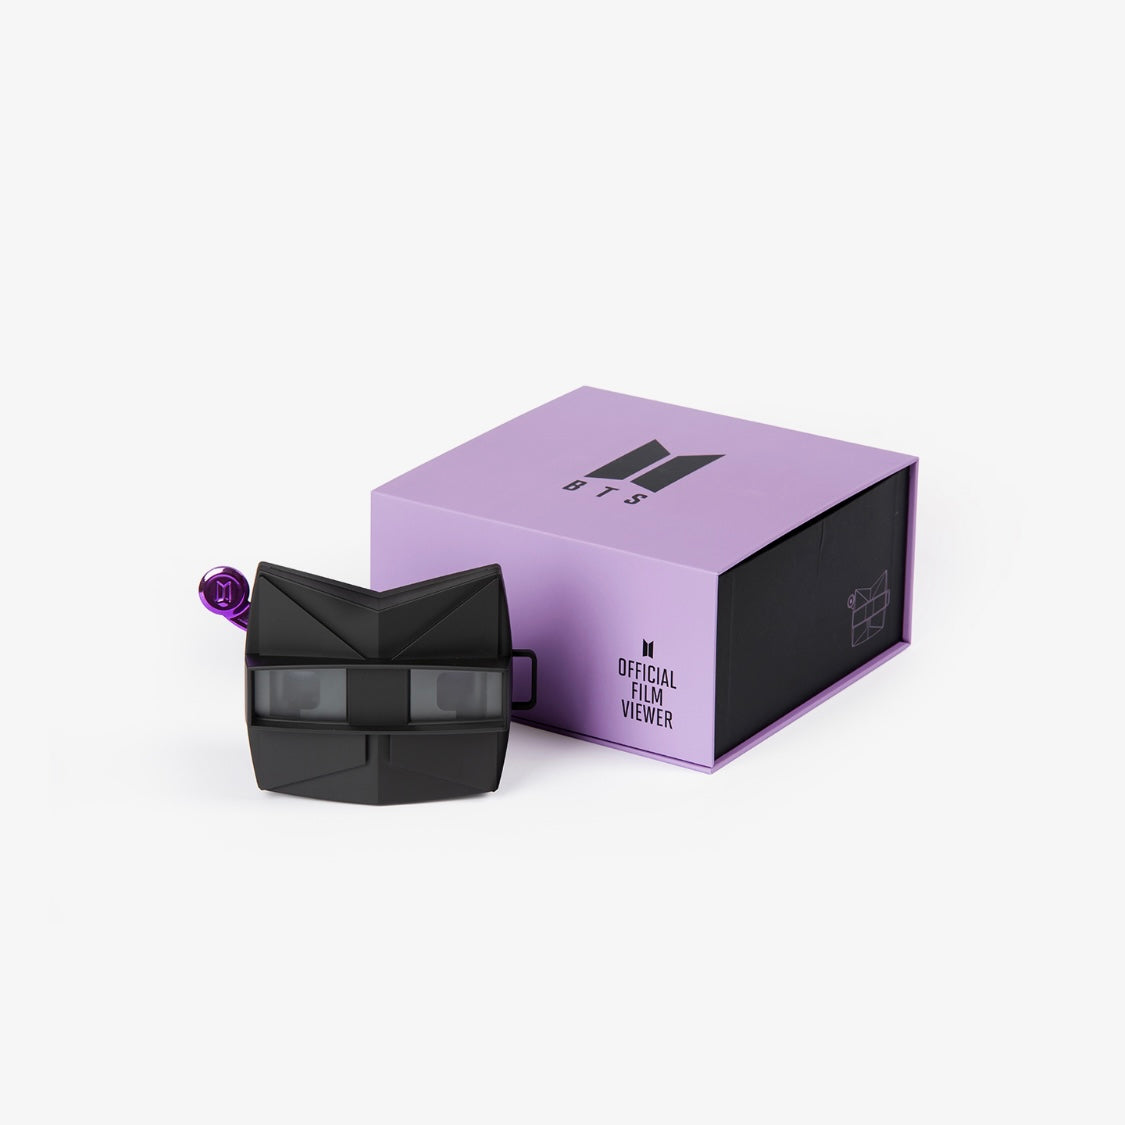 [BTS] Official Film Viewer Device Kit